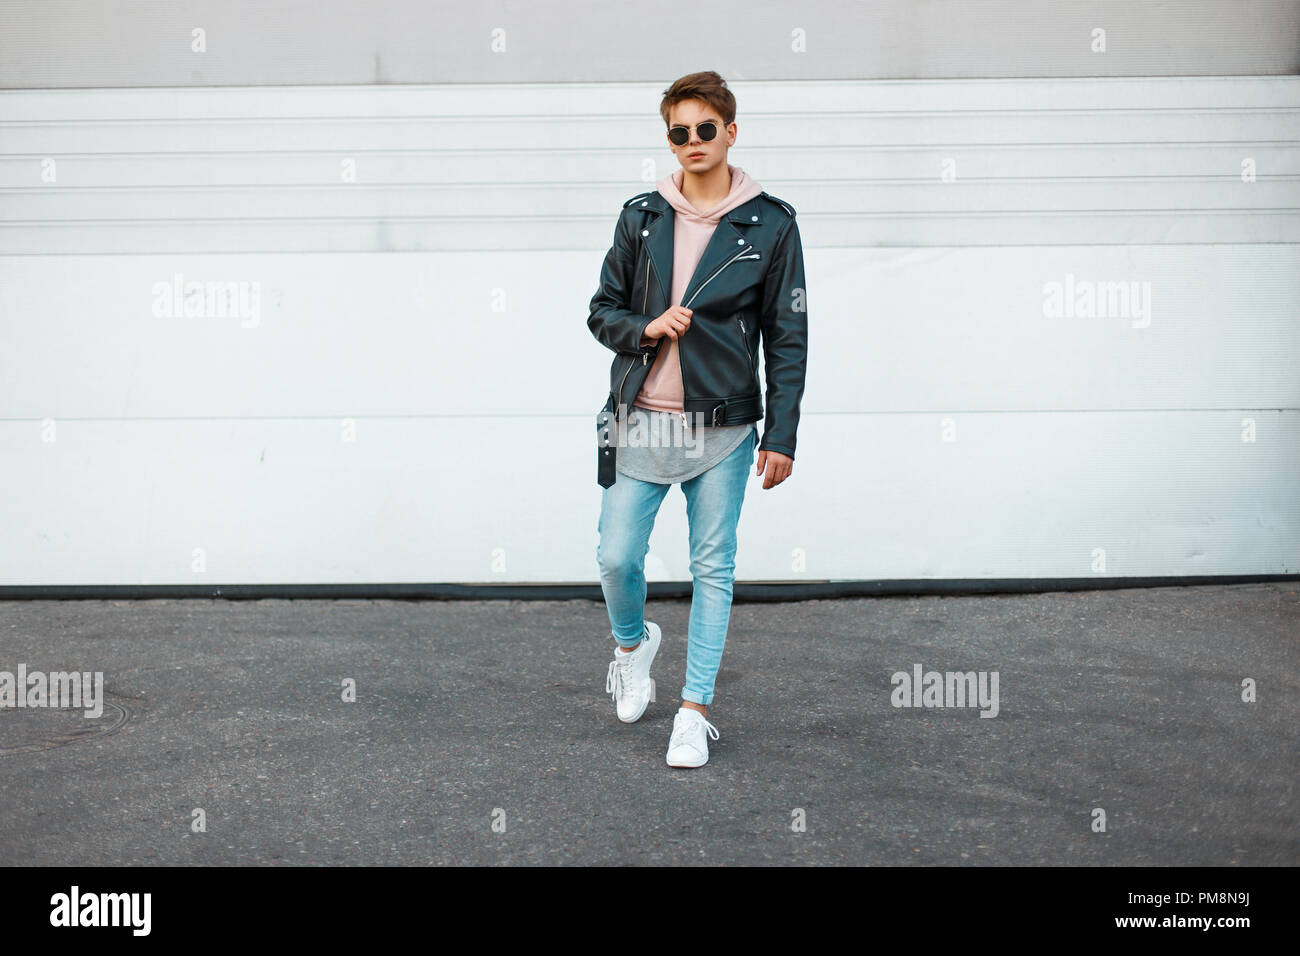 Handsome young model of a man with sunglasses in a black leather jacket, a pink sweatshirt, blue jeans and white sneakers near a metal white gate Stock Photo